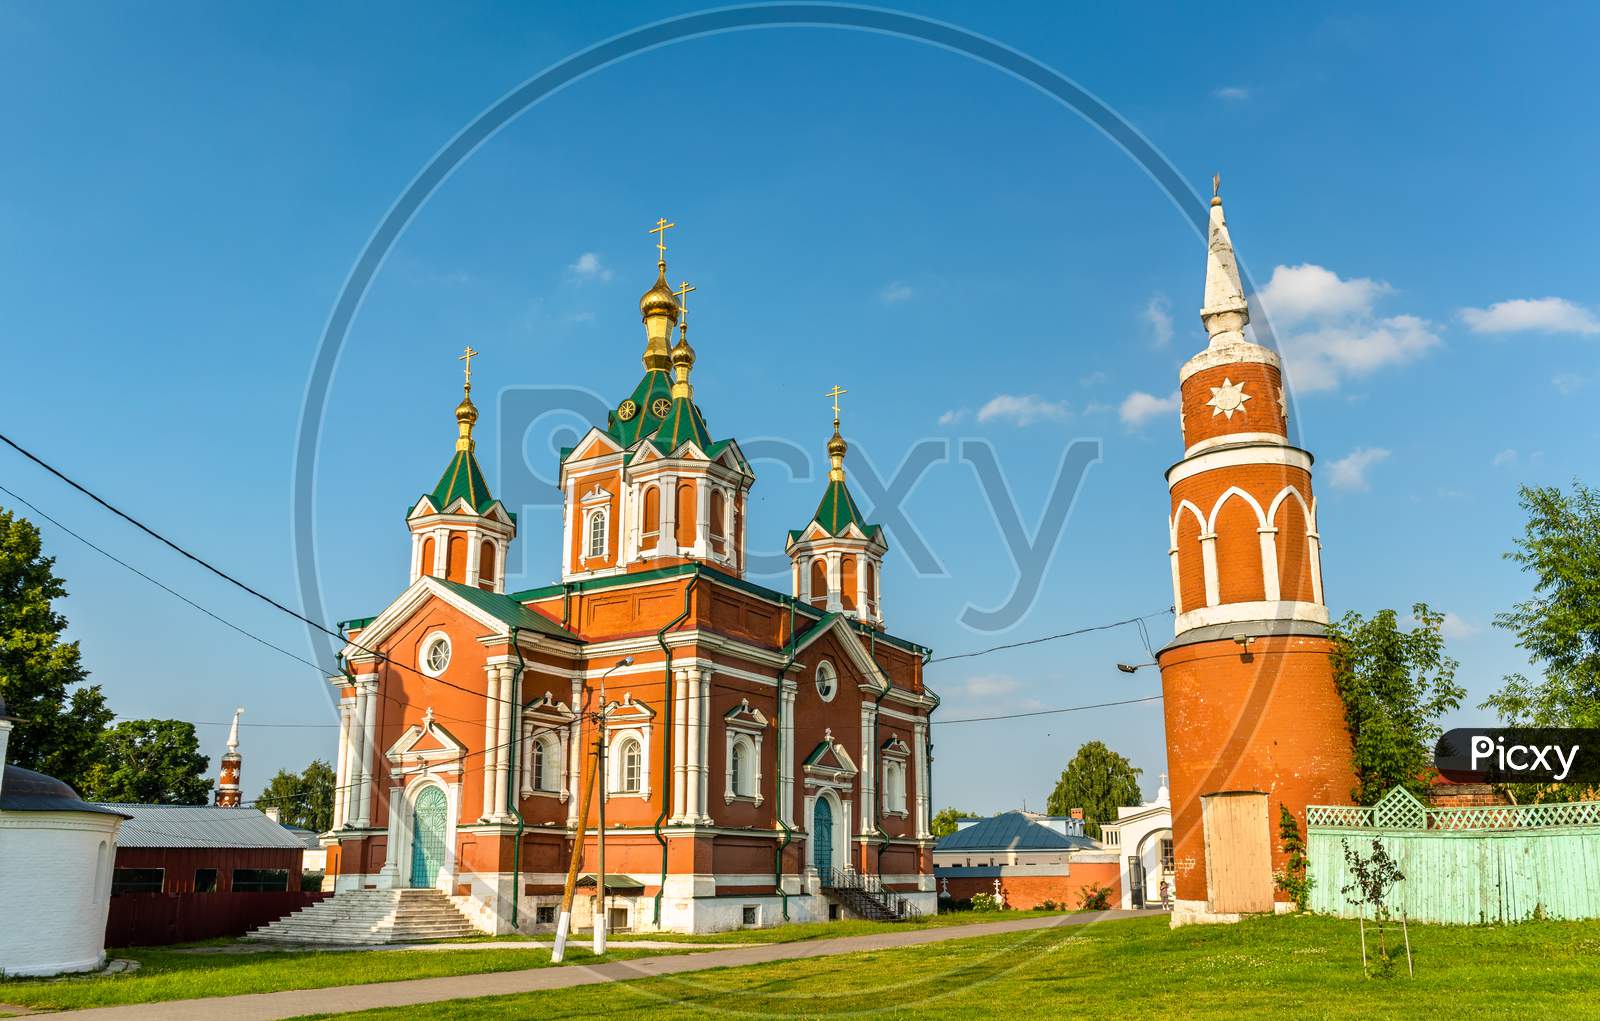 Image Of Brusensky Assumption Convent In Kolomna Russia Qy898478 Picxy